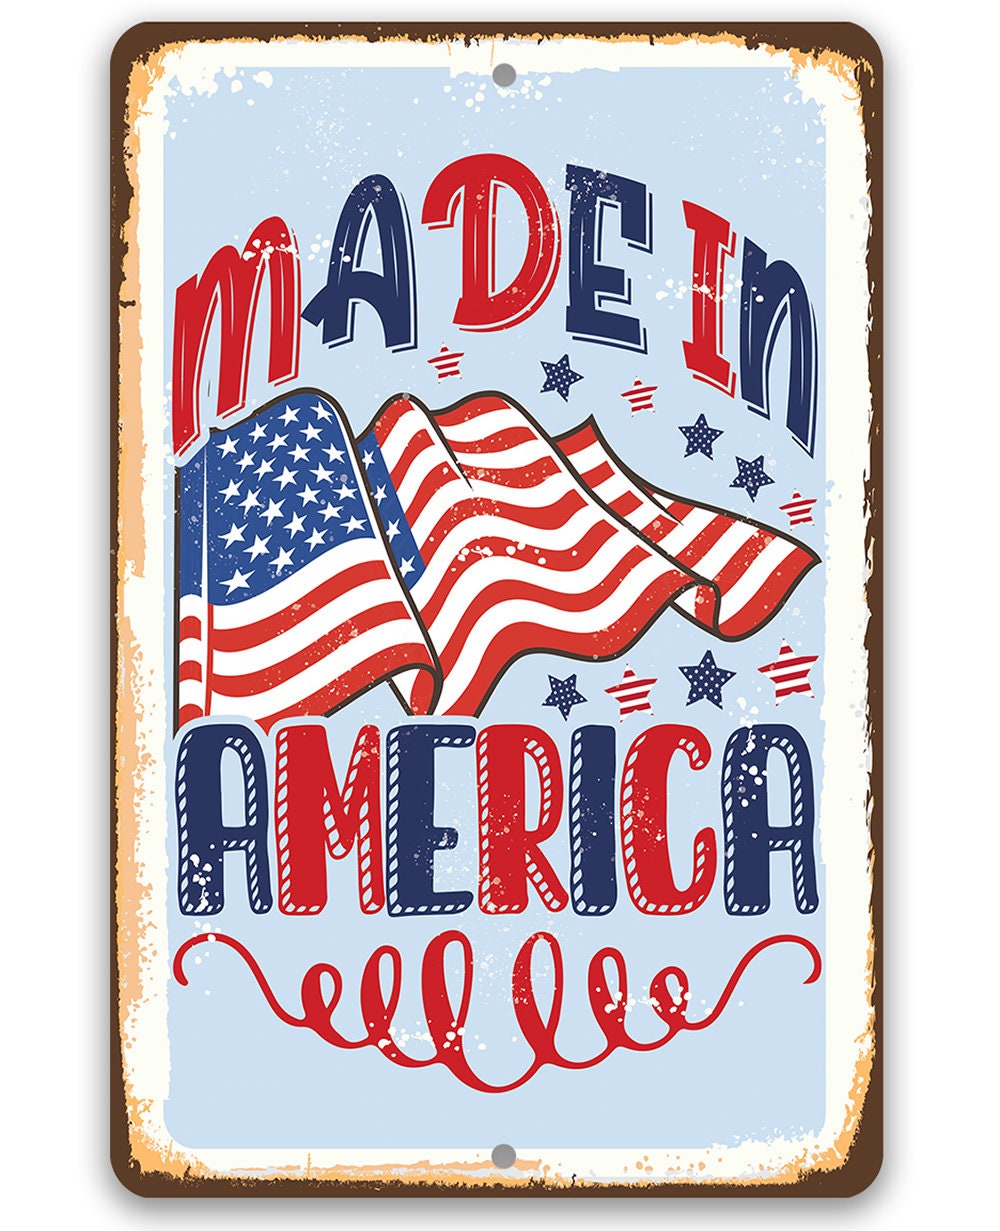 Made in America - Flag - 8" x 12" or 12" x 18" Aluminum Tin Awesome Metal Poster Lone Star Art 